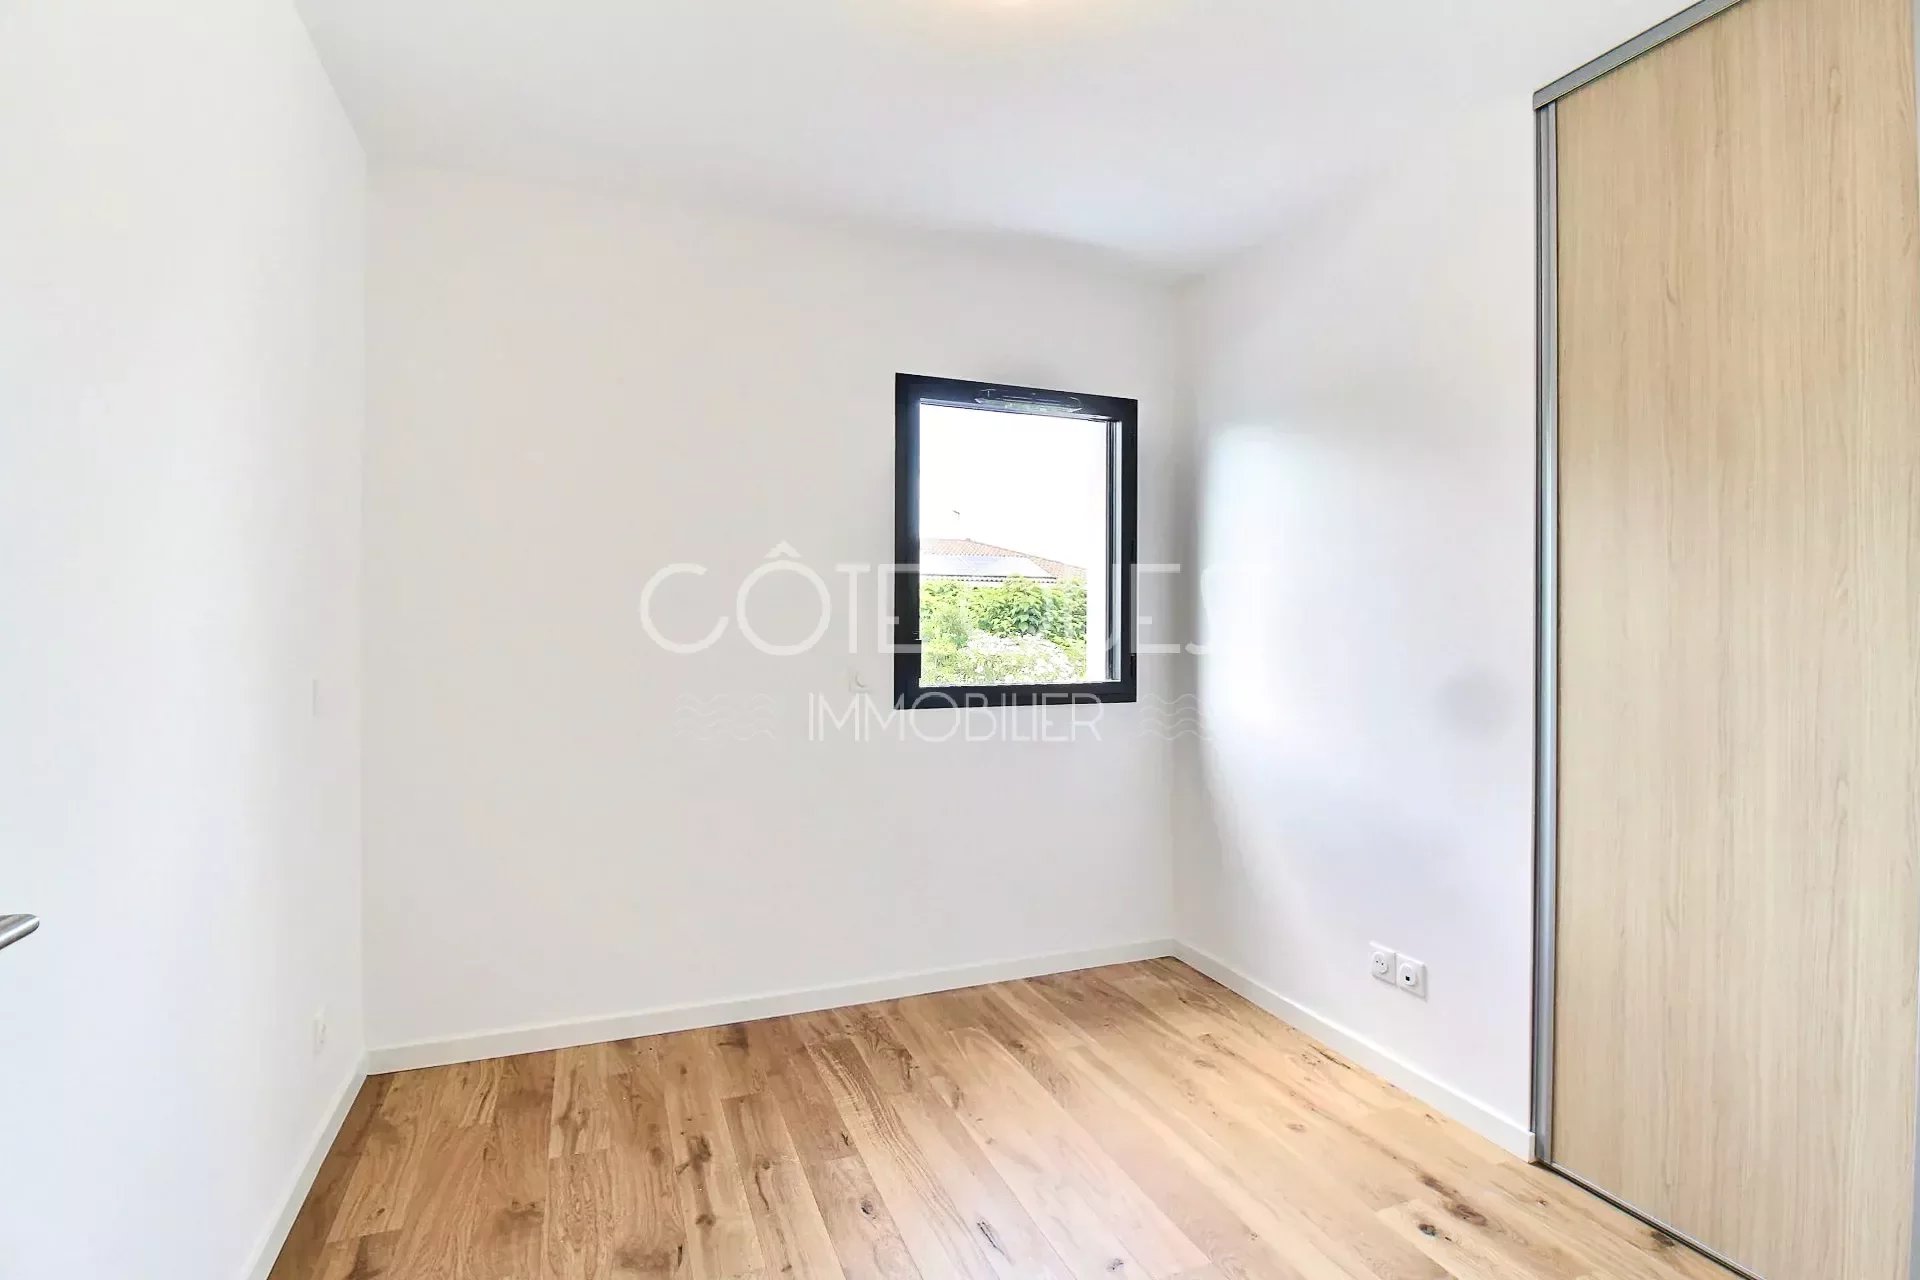 APPARTEMENT NEUF À VENDRE - ANGLET 5 CANTONS